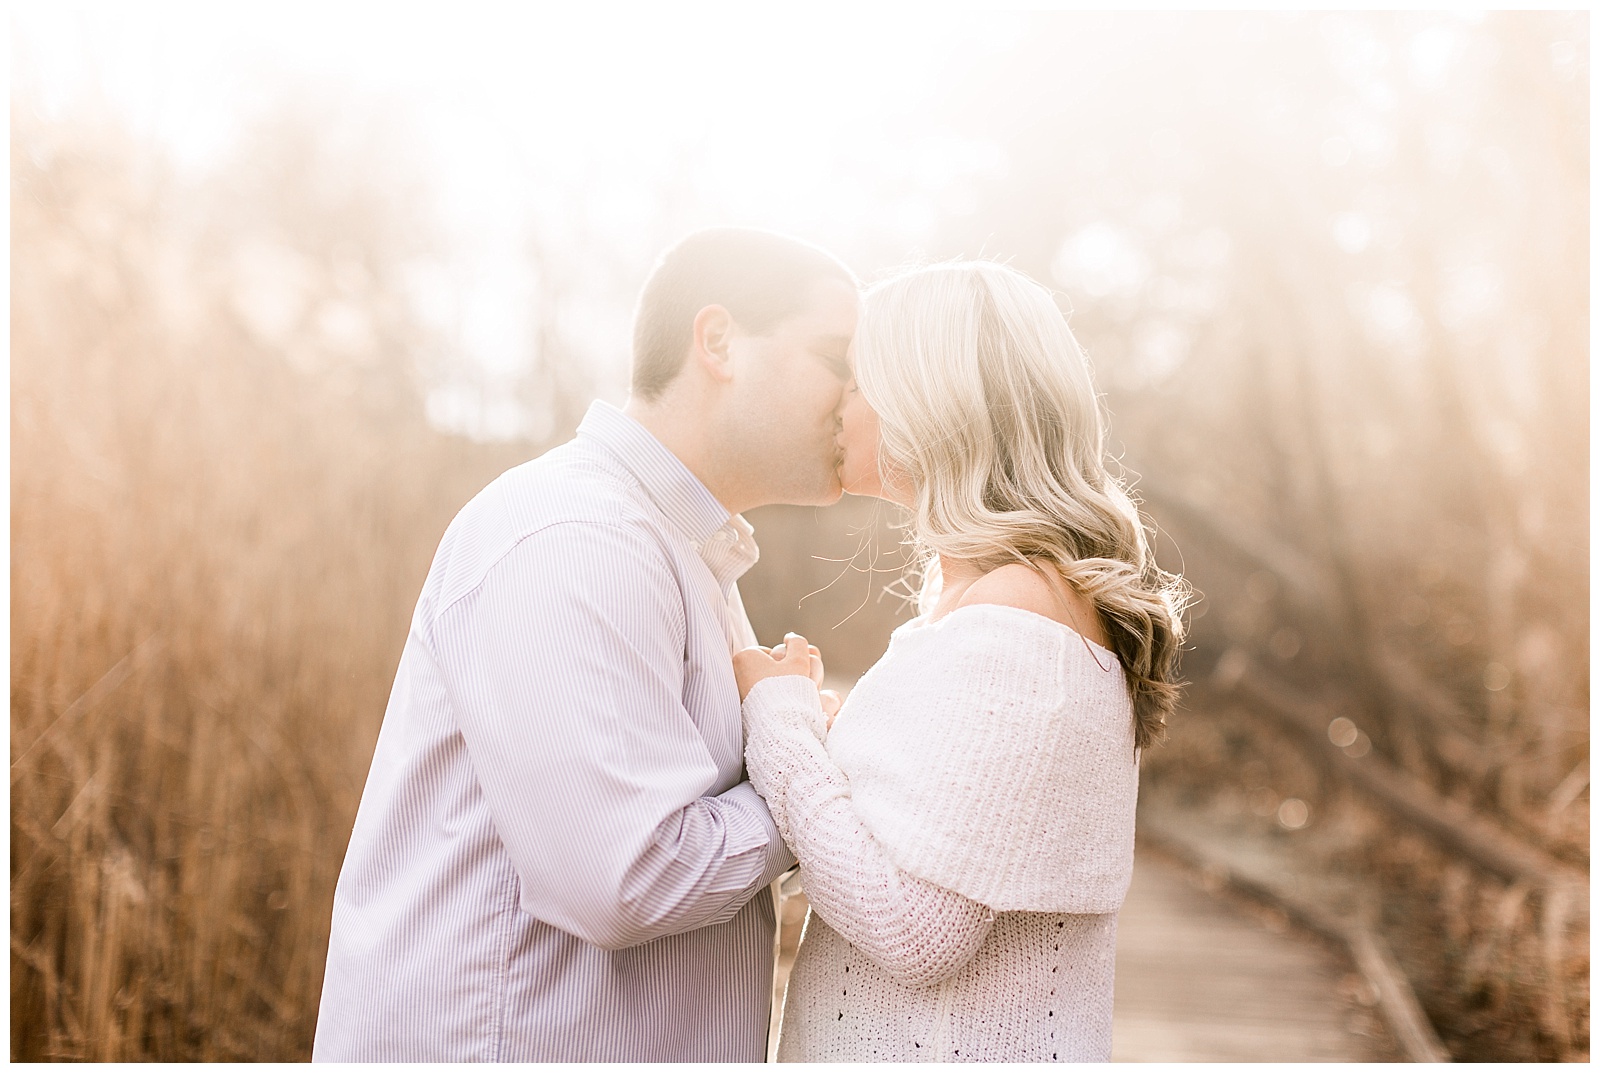 baltimore, wedding, photographer, baltimore wedding photographer, engagement sessions, engaged, natural light, golden hour, spring, fall, candid, outdoors, travel, rustic, nature, love, cute, happy, waterfront, maryland wedding photographer, maryland, hannah mink photography